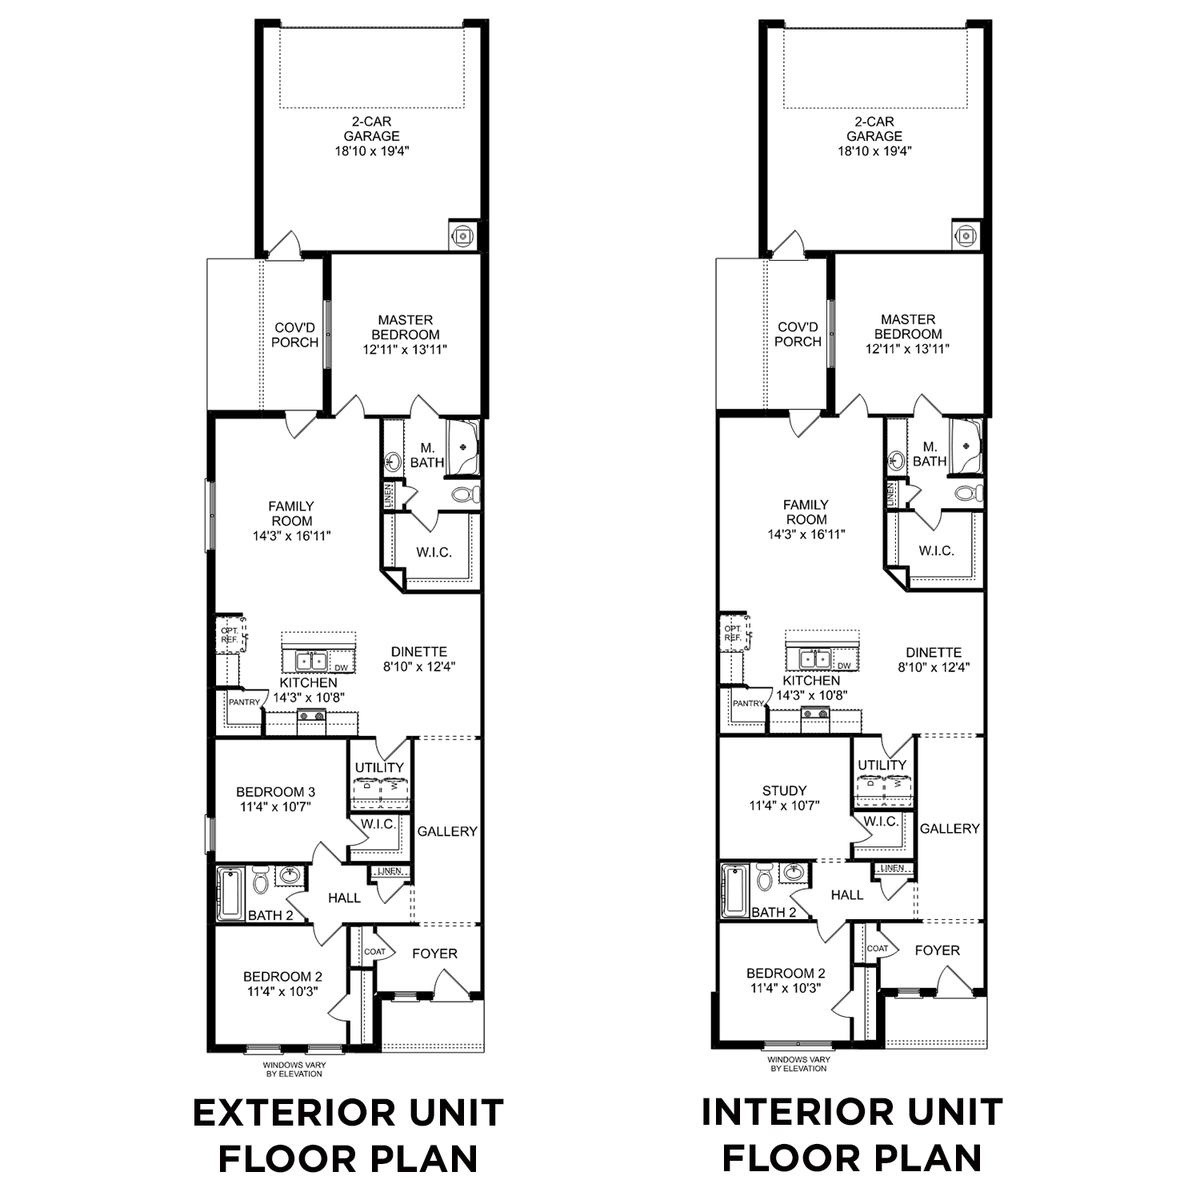 1 - The Camilla A floor plan layout for 429 Ronnie Drive SE in Davidson Homes' Cain Park community.